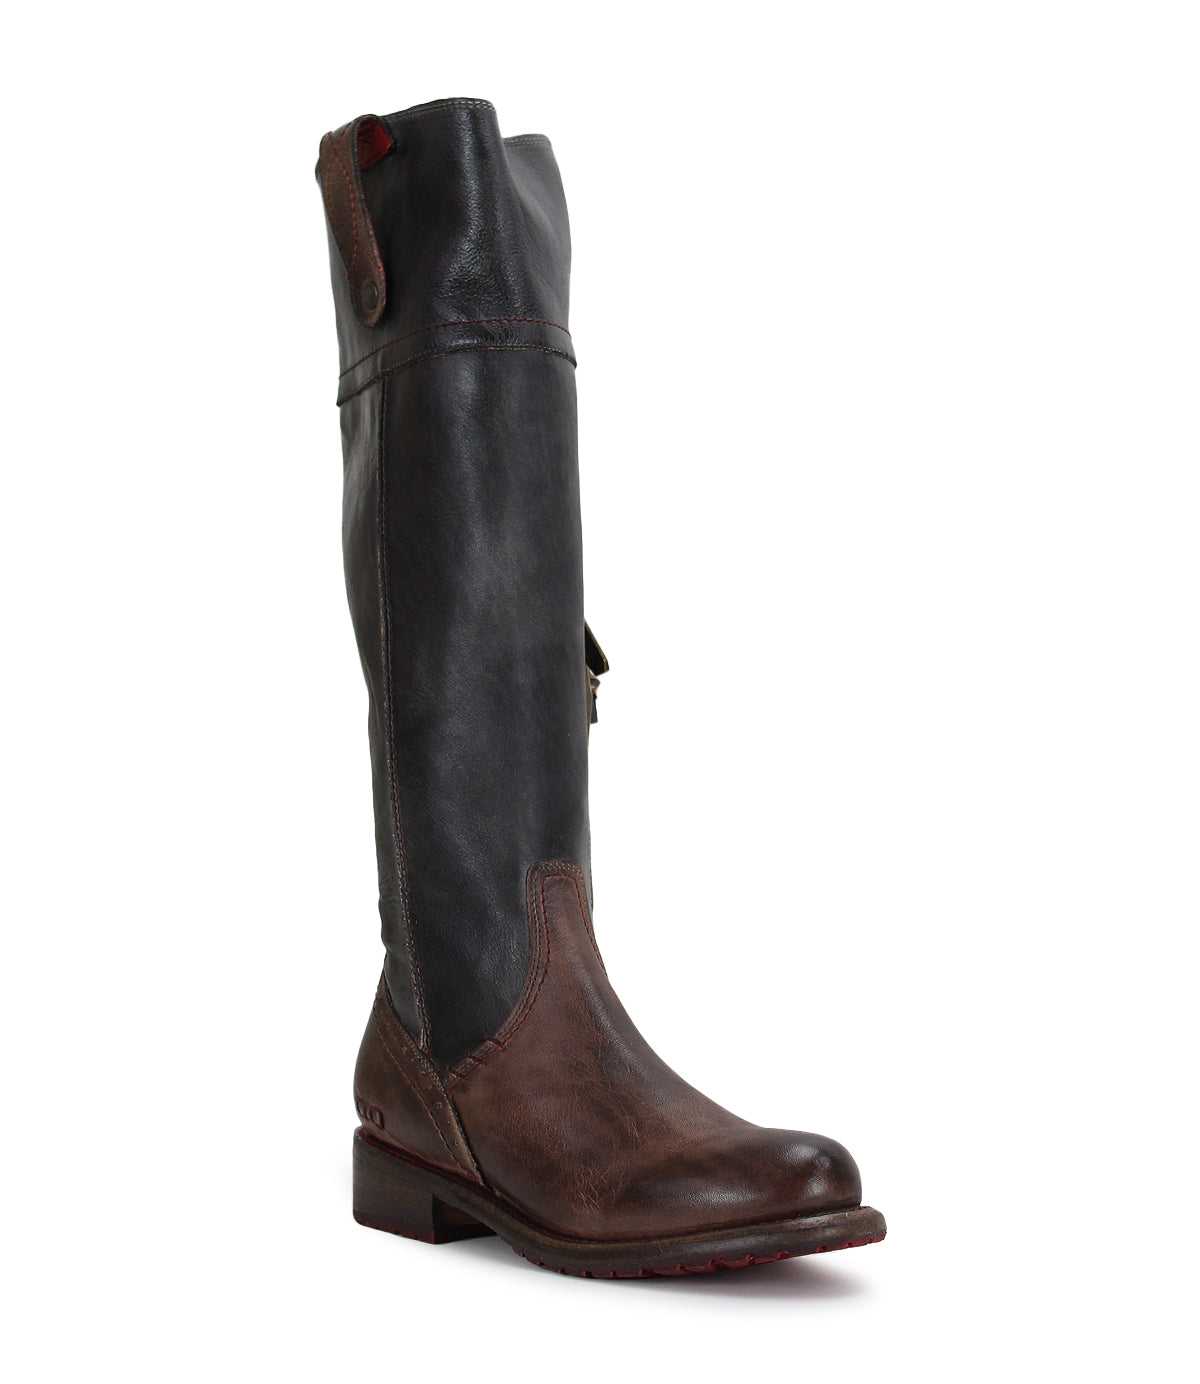 A women's brown and black Jacqueline riding boot by Bed Stu.